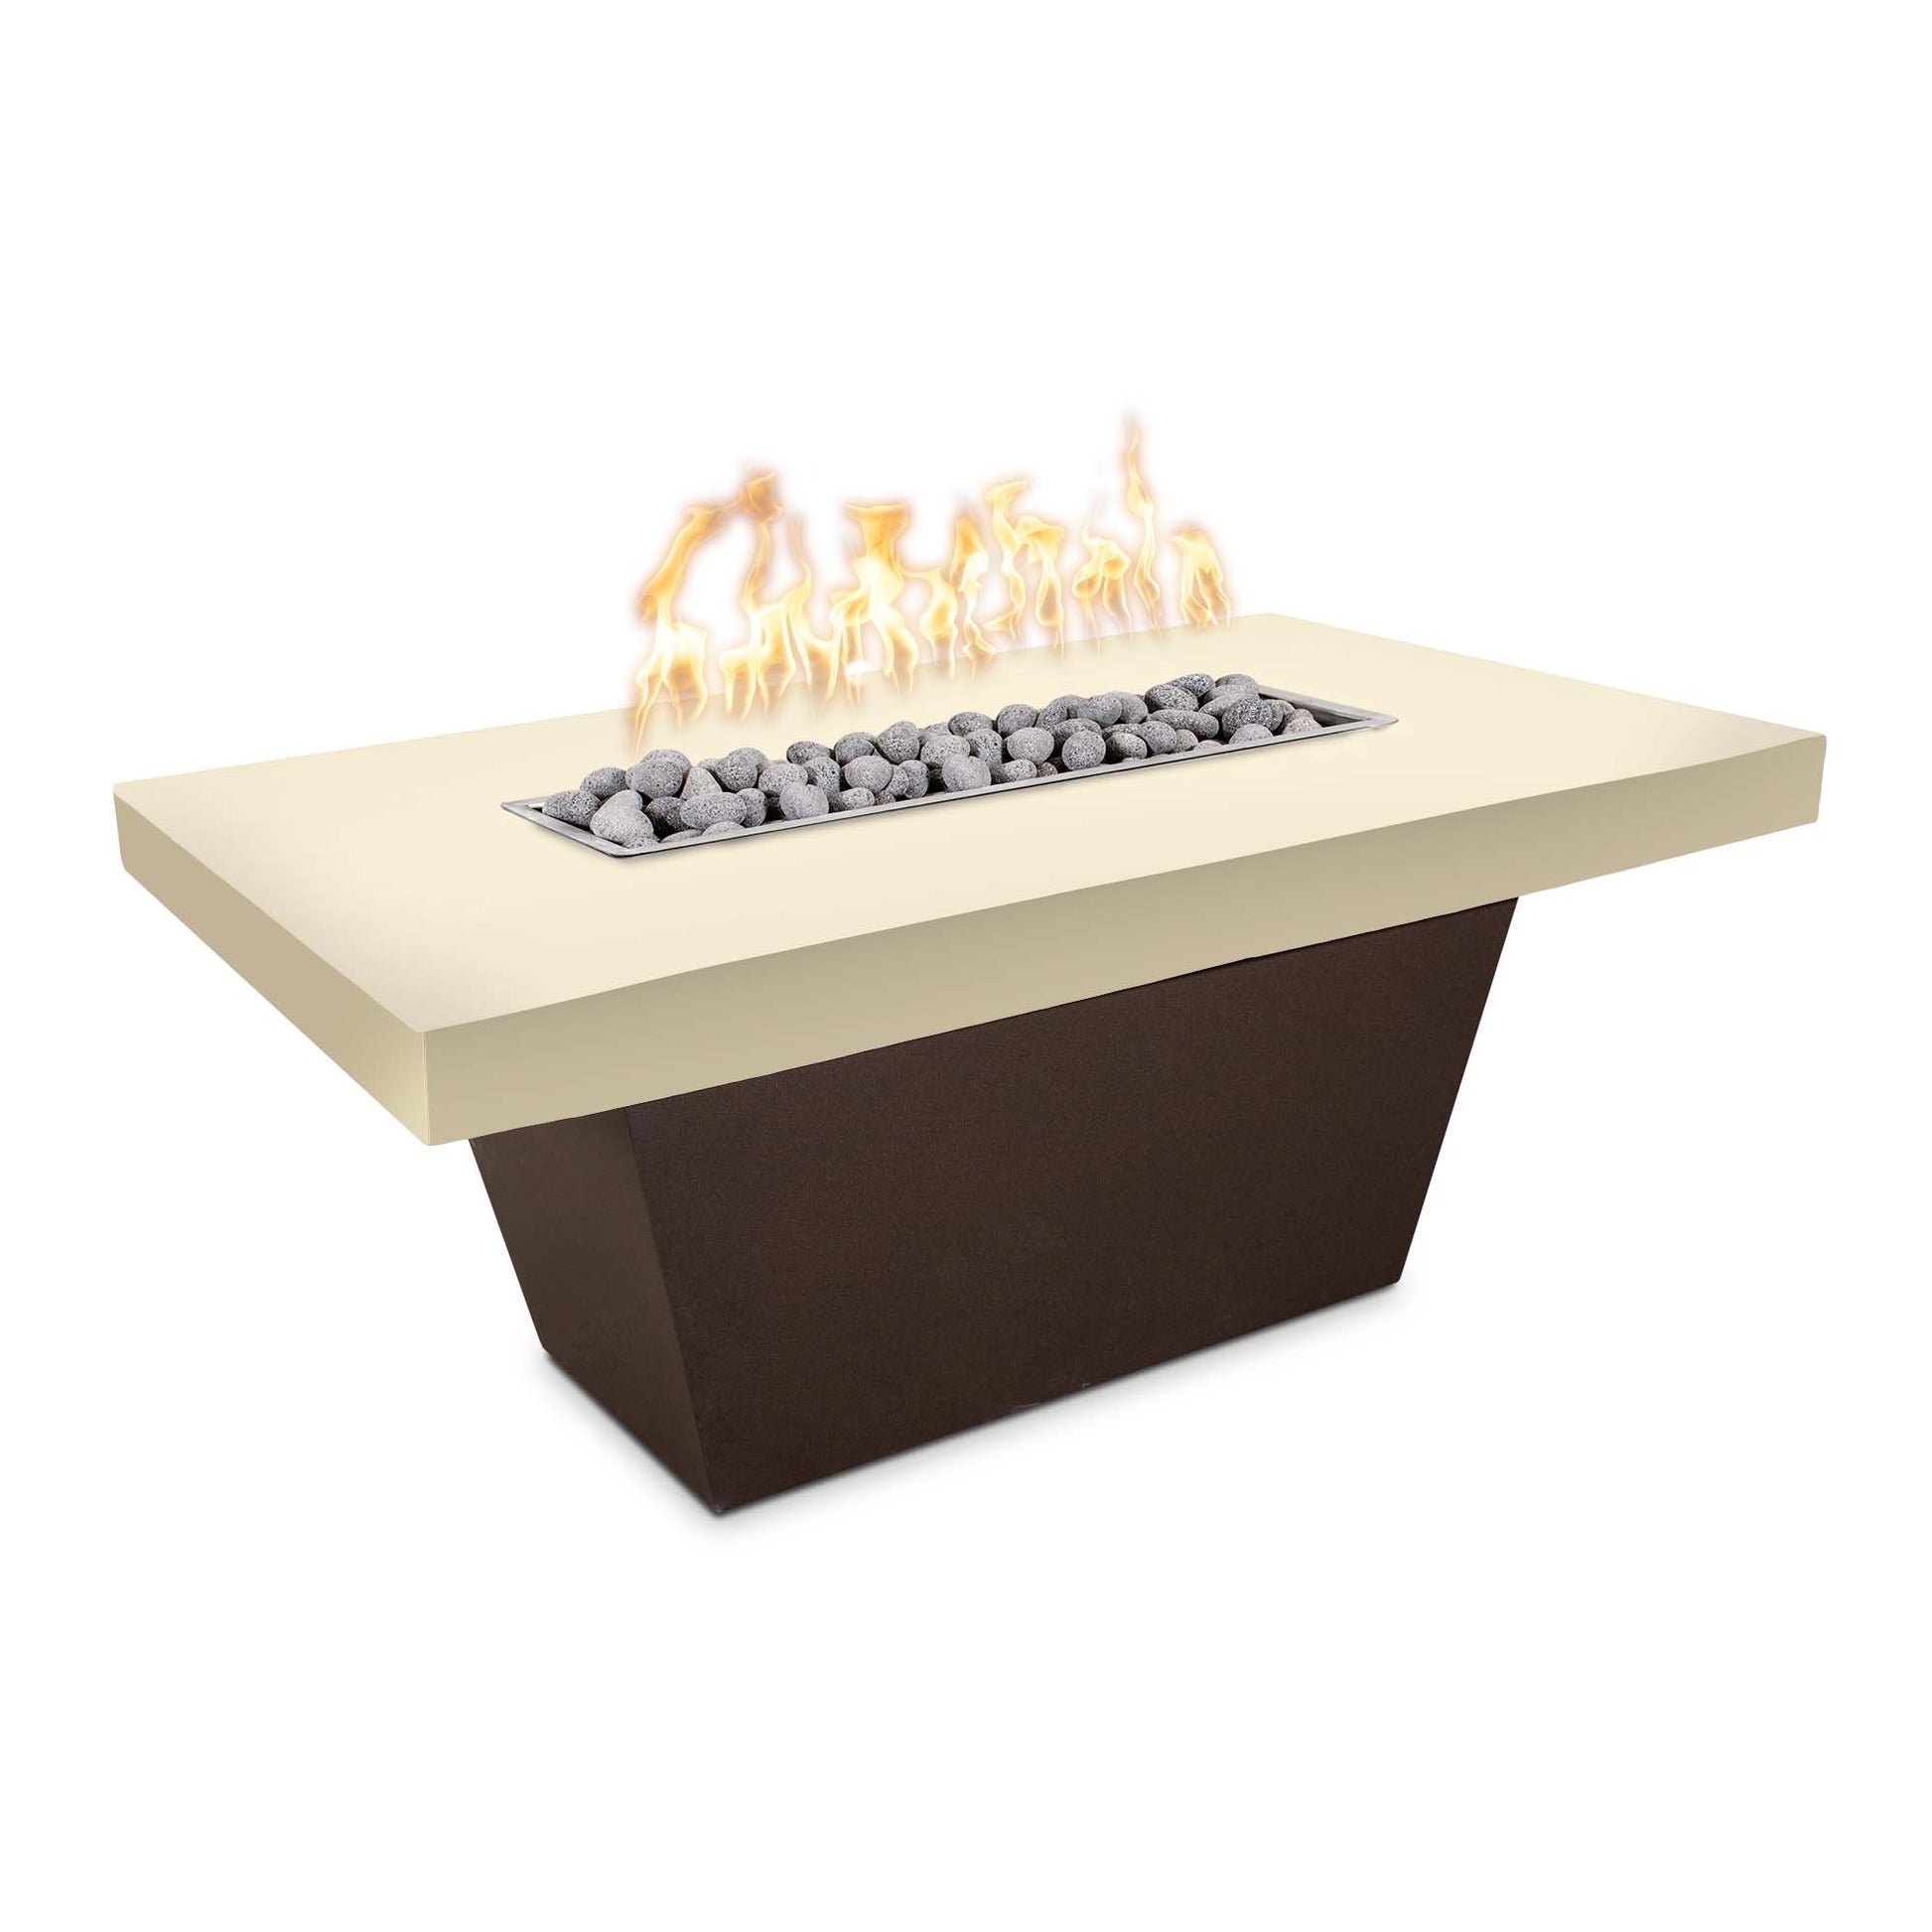 The Outdoor Plus Tacoma 48" Natural Gray Concrete Top & Pewter Powder Coated Base Natural Gas Fire Table with Match Lit with Flame Sense Ignition